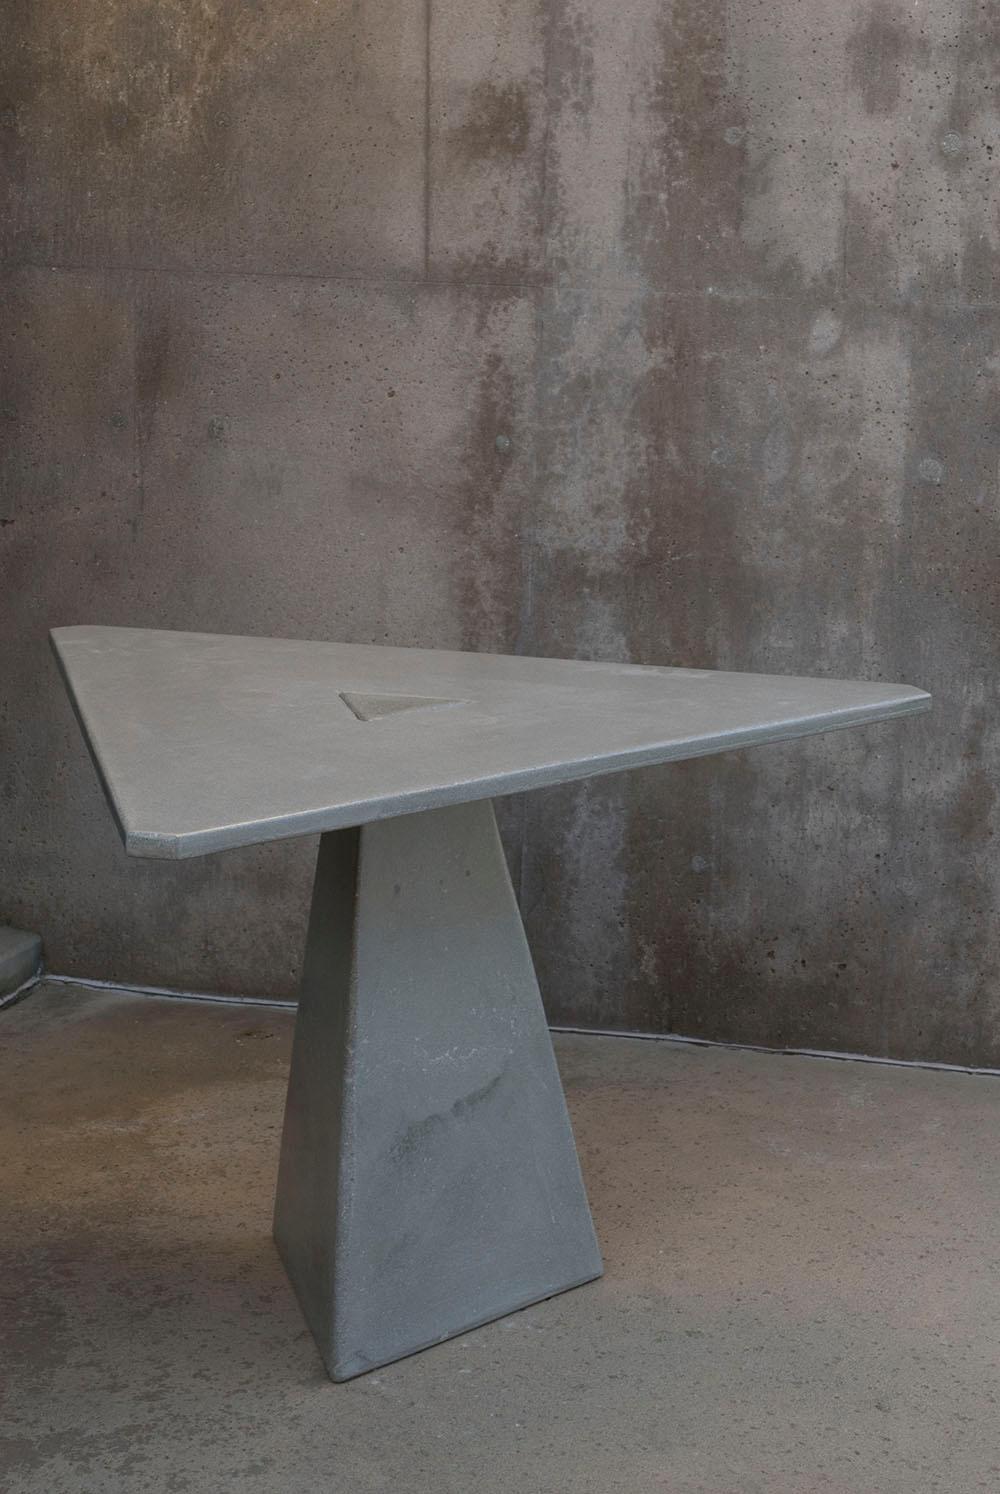 This is where we gather for tea. The triangular locking table features two pieces of concrete: triangular tabletop and base, which lock together by gravity alone. Equal in art and utility, the table serves as a collector's piece and as a functional